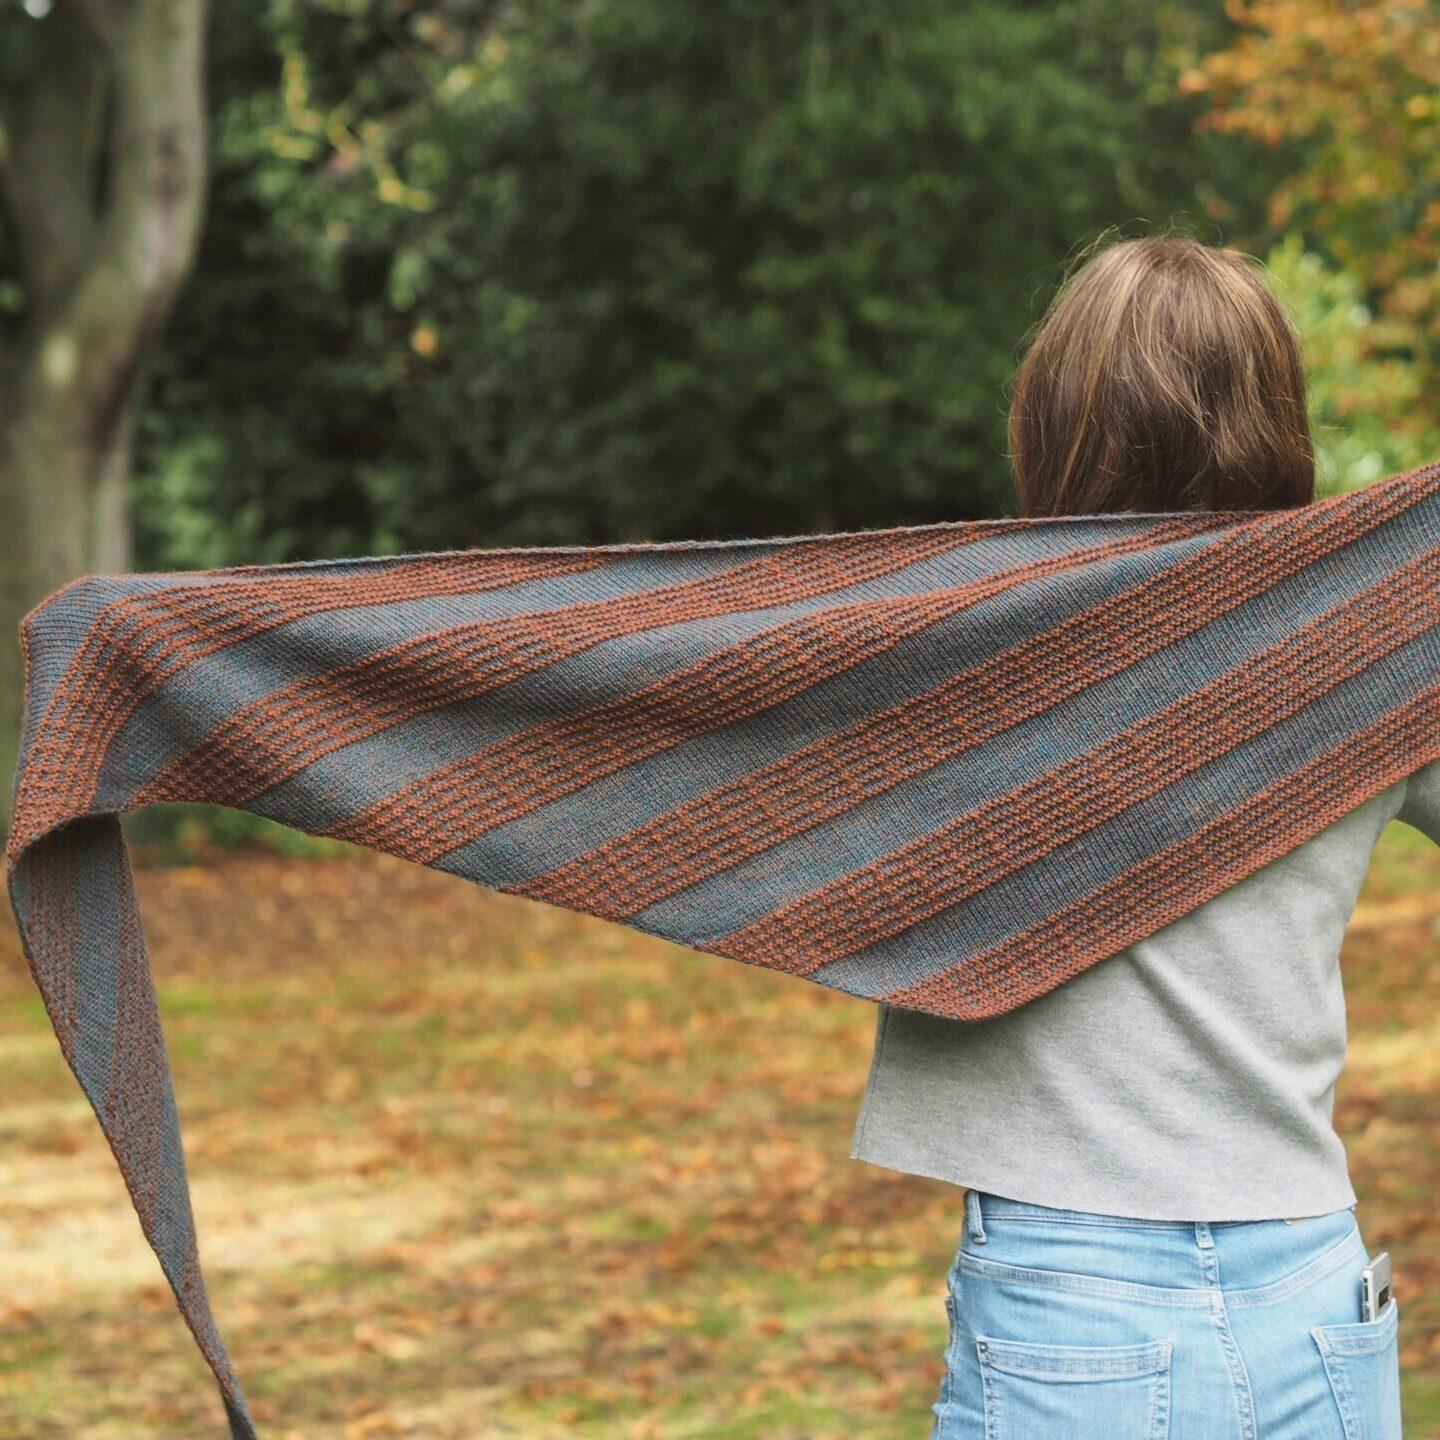 Triangular shawl in brown and blue with guitar fret slipped stitches